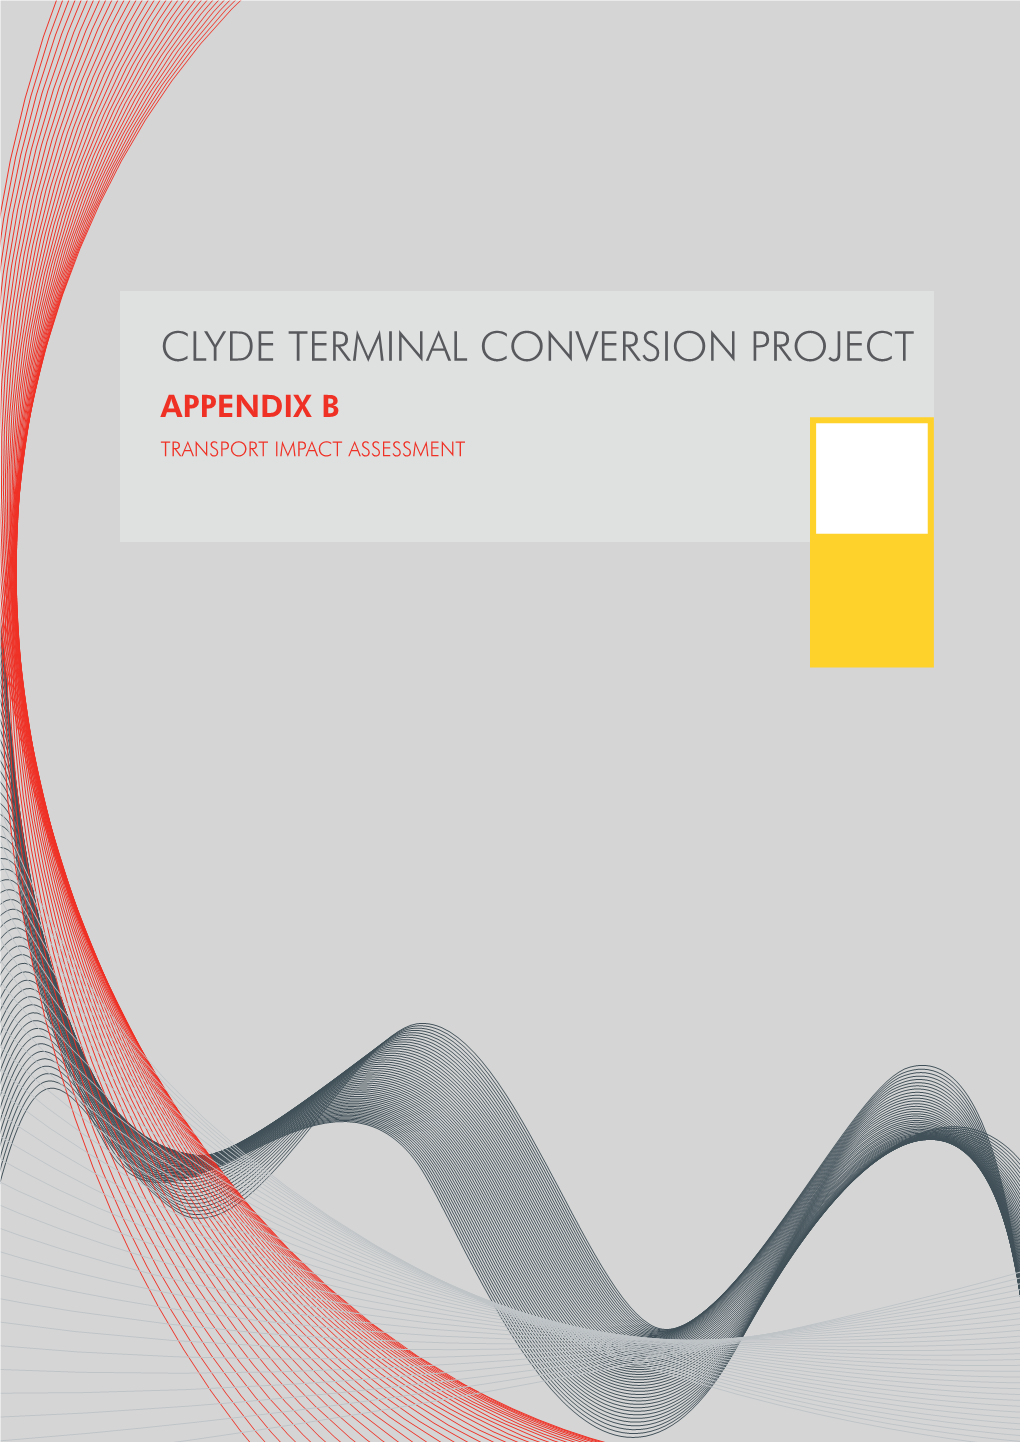 TRANSPORT IMPACT ASSESSMENT Clyde Terminal Conversion Project the Shell Company of Australia Ltd 06-Nov-2013